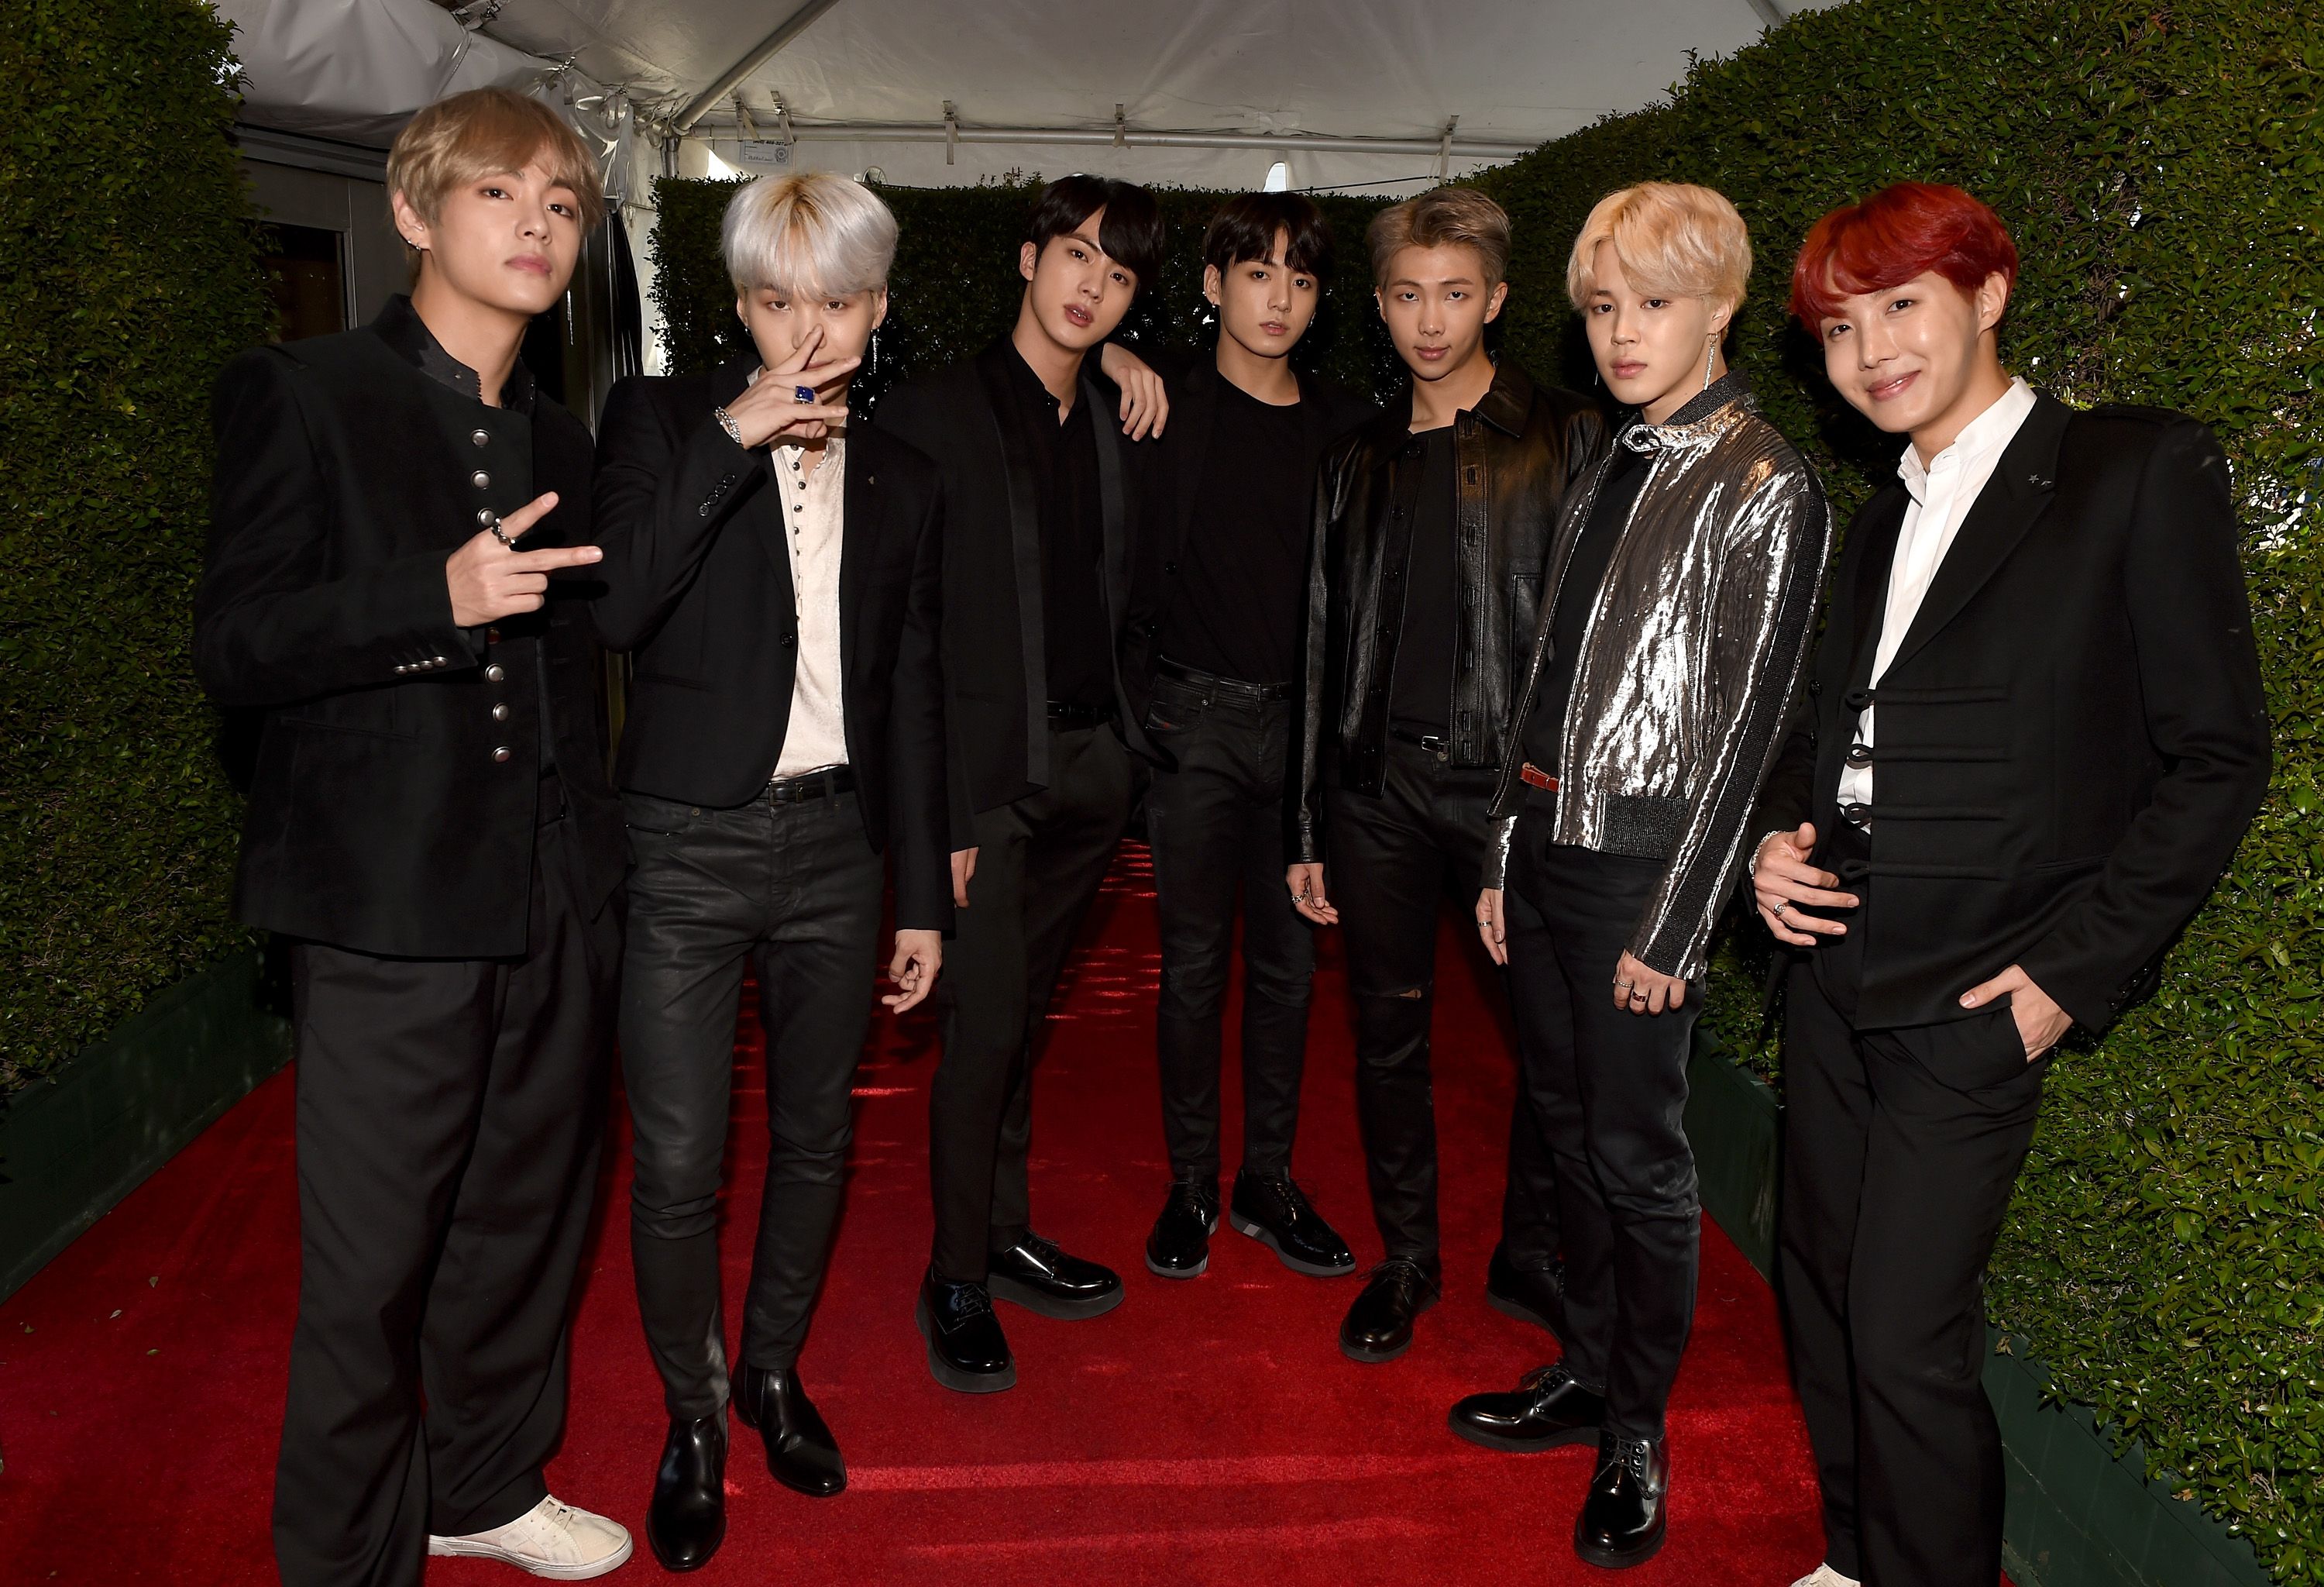 BTS Arrive at American Music Awards - BTS AMA 2017 Red Carpet Style